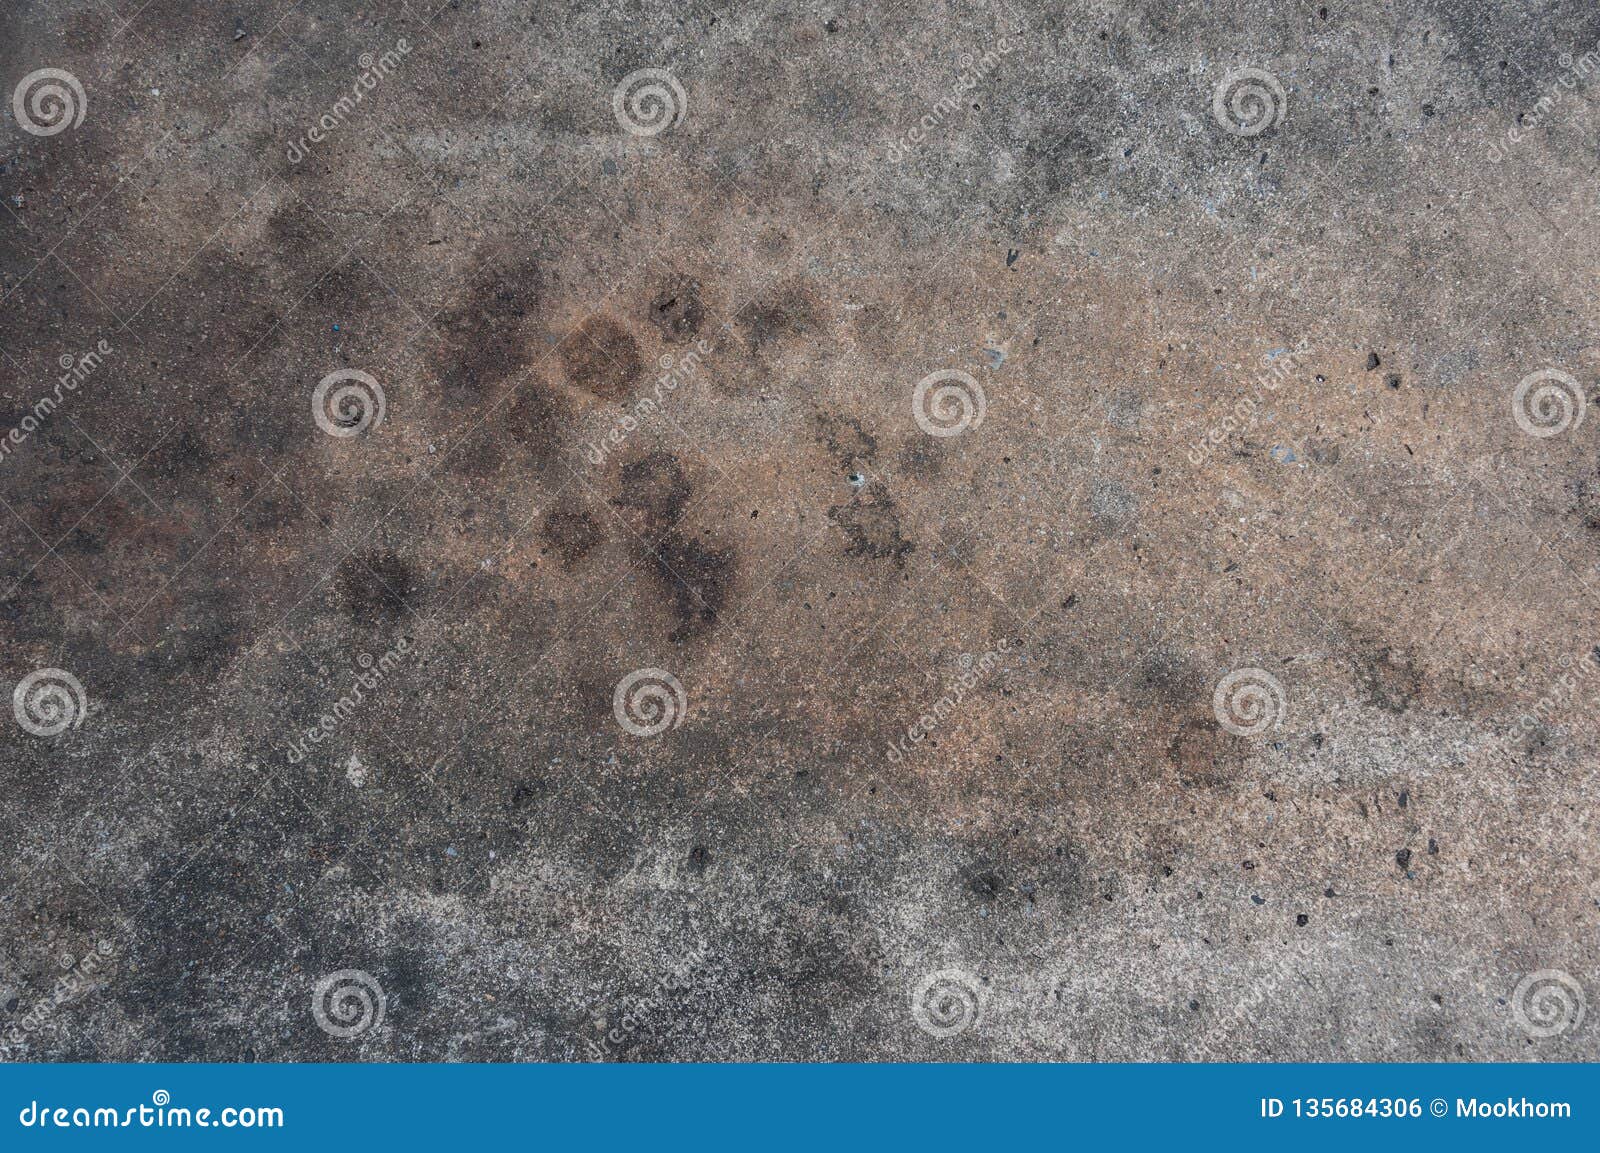 Dirty Oil Stain Cement Floor Texture Stock Photo Image Of Wall